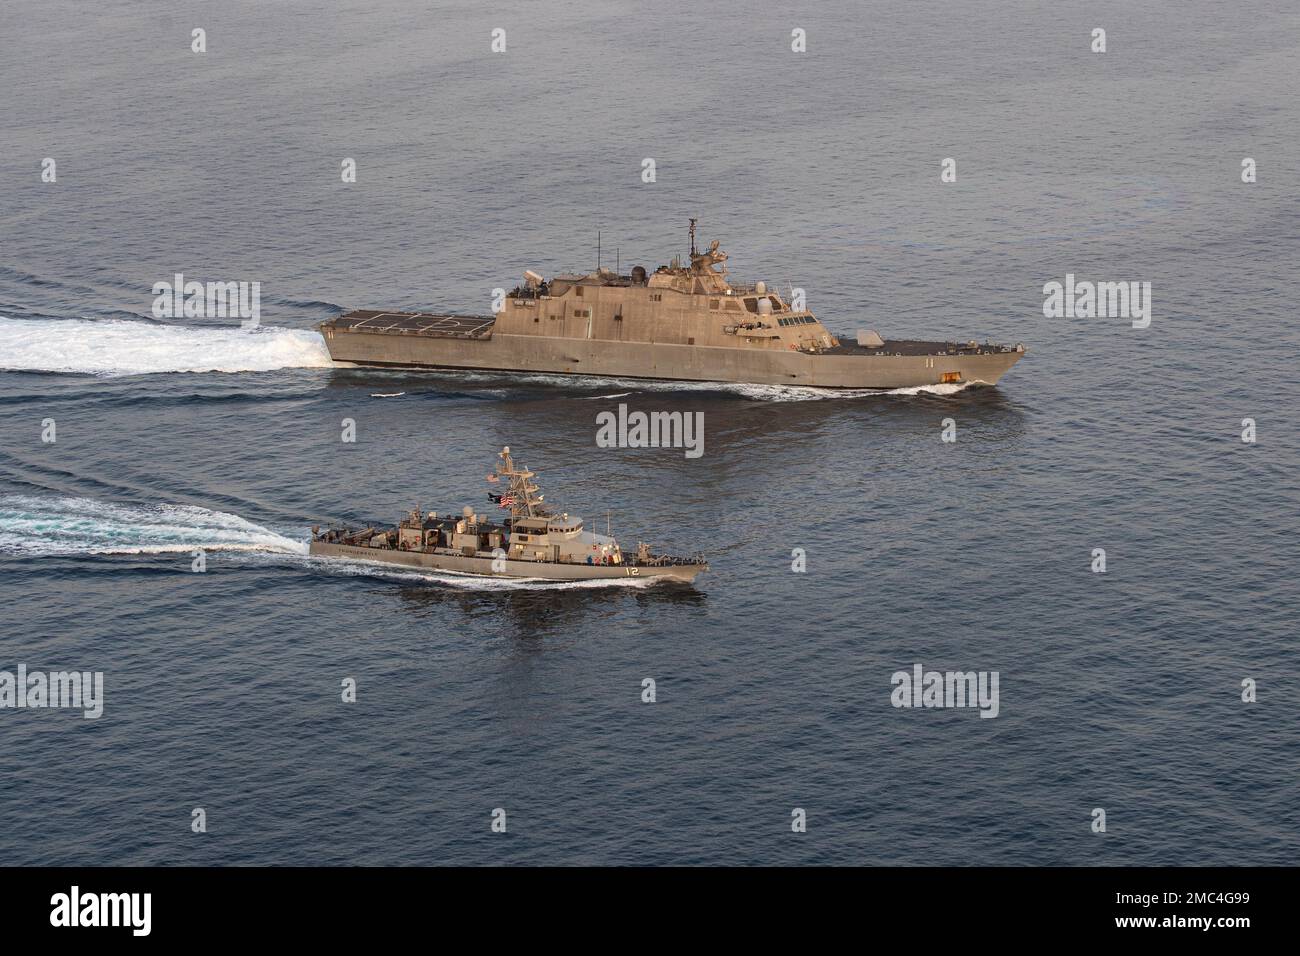 220624-N-NR343-2906 STRAIT OF HORMUZ (June 24, 2022) Littoral combat ship USS Sioux City (LCS 11) and coastal patrol ship USS Thunderbolt (PC 12) transit the Strait of Hormuz, June 24. Sioux City is deployed to the U.S. 5th Fleet area of operations to help ensure maritime security and stability in the Middle East region. Stock Photo